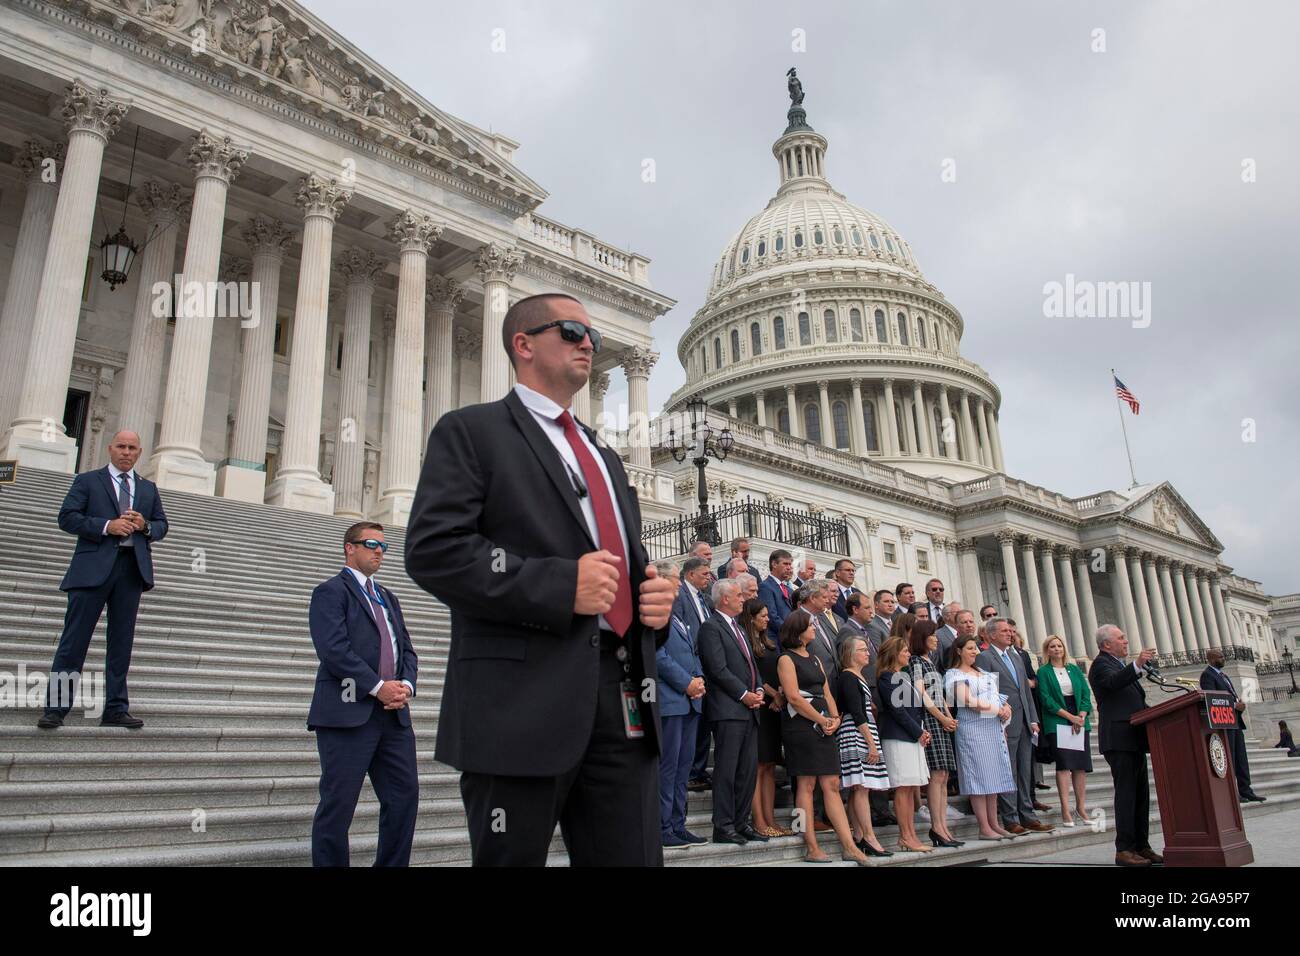 United States House Minority Whip Steve Scalise (Republican of Louisiana) offers remarks on President Joe Biden and House Speaker Nancy Pelosi's leadership during a press conference outside of the US Capitol in Washington, DC, Thursday, July 29, 2021. Credit: Rod Lamkey/CNP Stock Photo